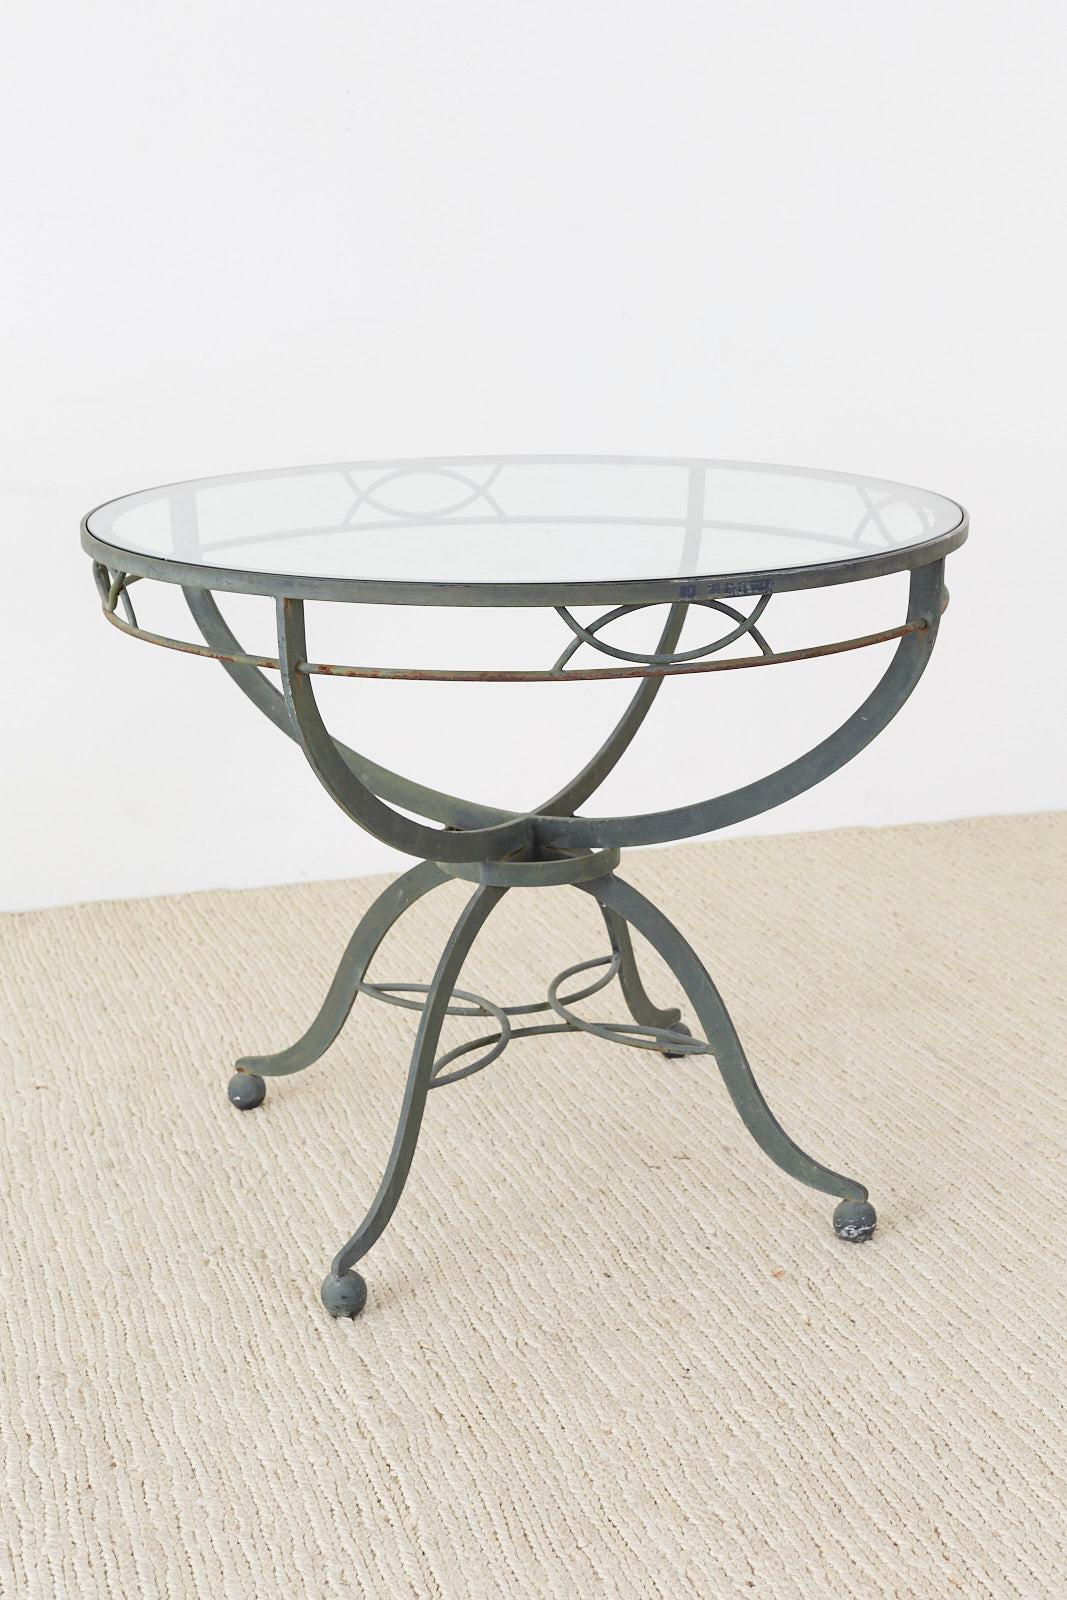 Midcentury French Neoclassical Style Iron Garden Dining Table In Good Condition In Rio Vista, CA